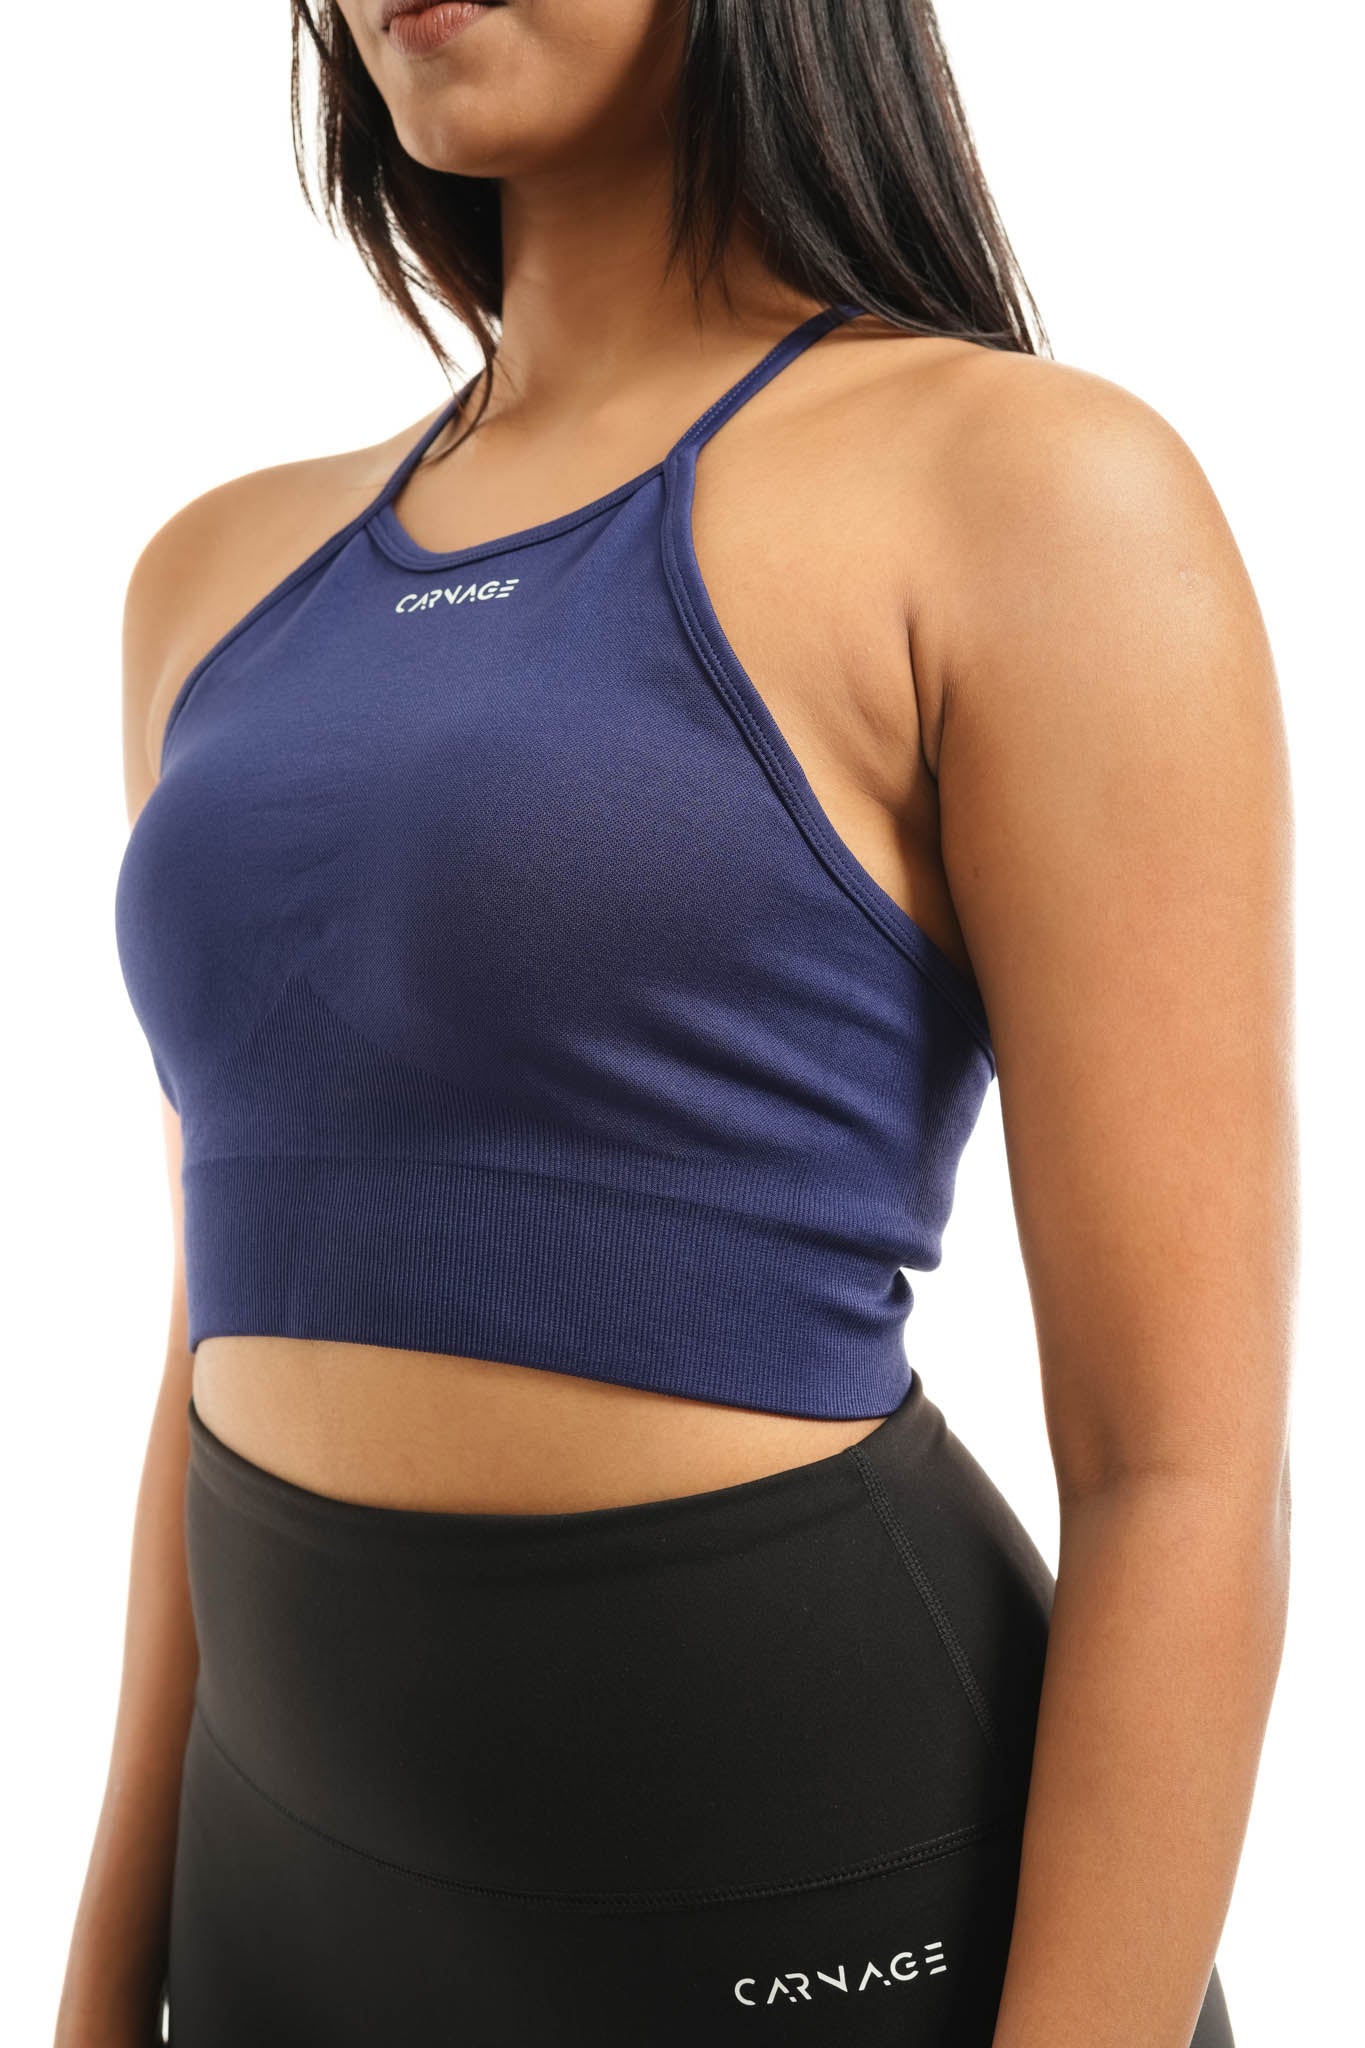 W1066 - Day to Day Top - Navy